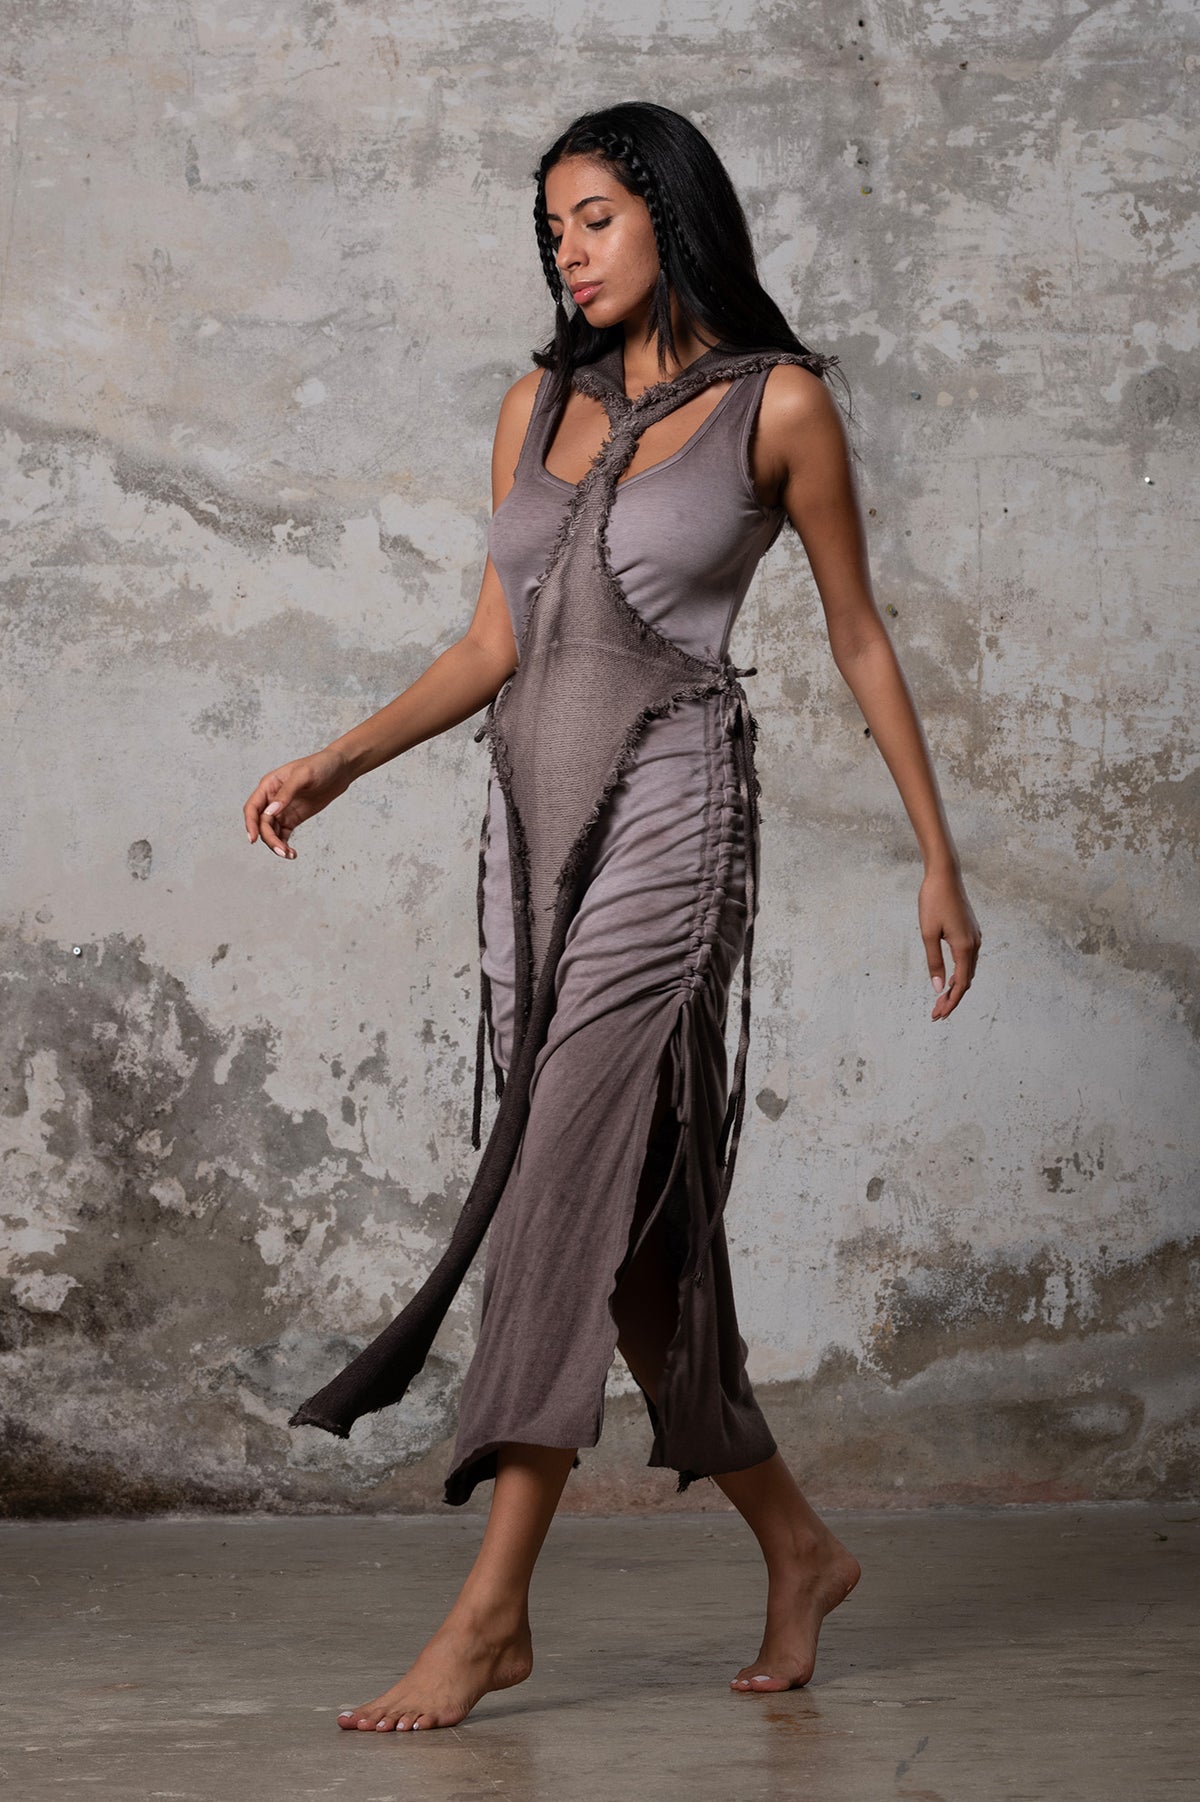 Elevate your style with our exquisite Warrior RA Dress. This boho-chic, ethereal maxi features an alluring raw cotton, making it ideal for festivals and bohemian events. Channel your inner warrior with this timeless, elegant, and empowering garment.